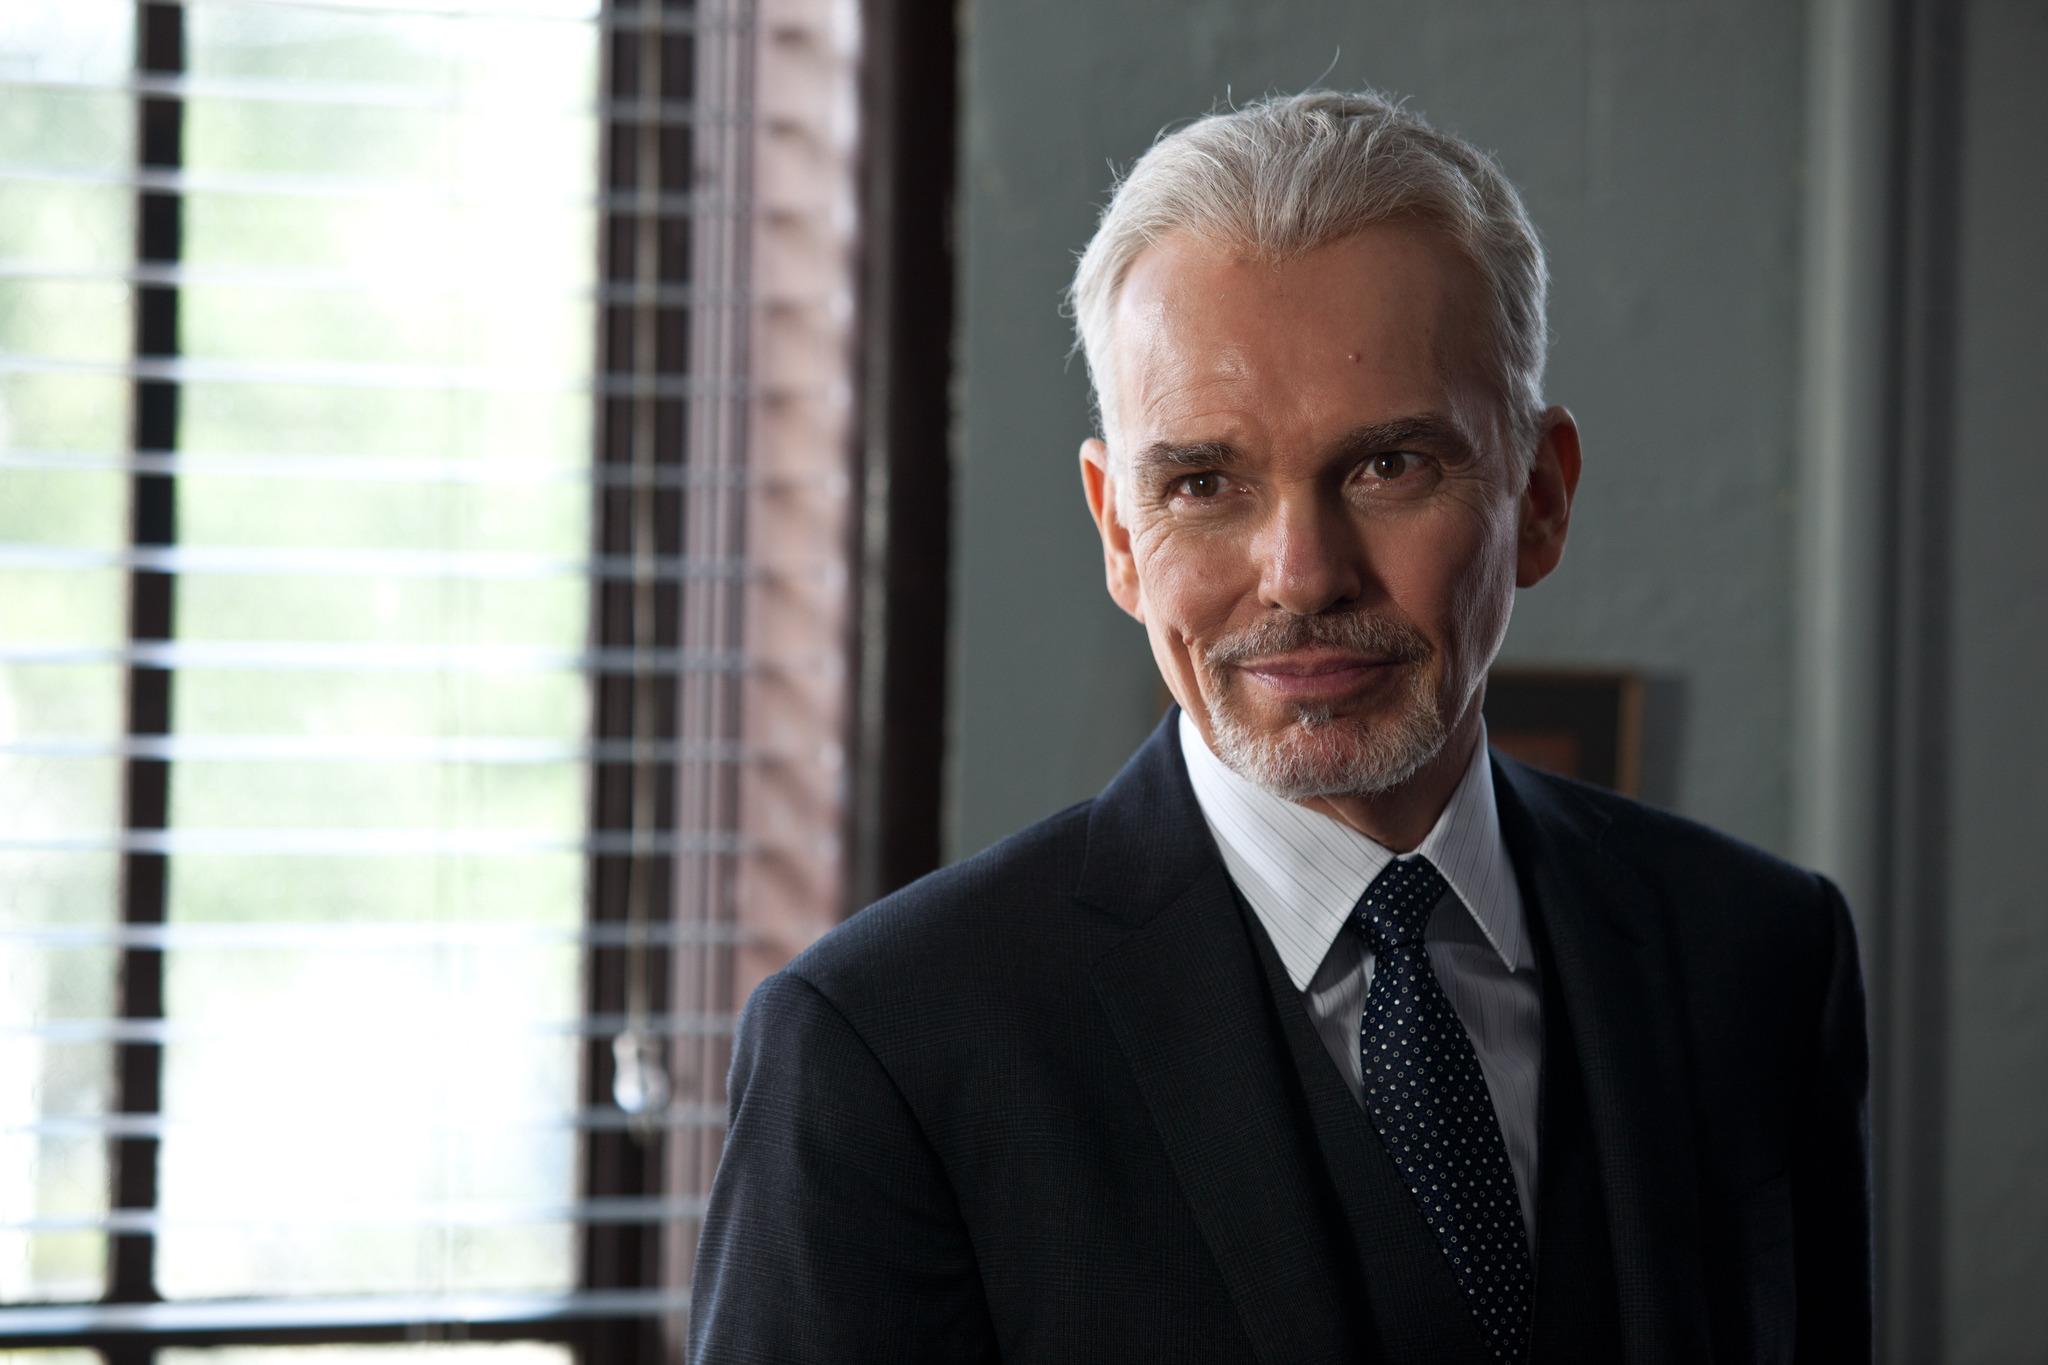 still-of-billy-bob-thornton-in-the-judge-2014-large-picture.jpg